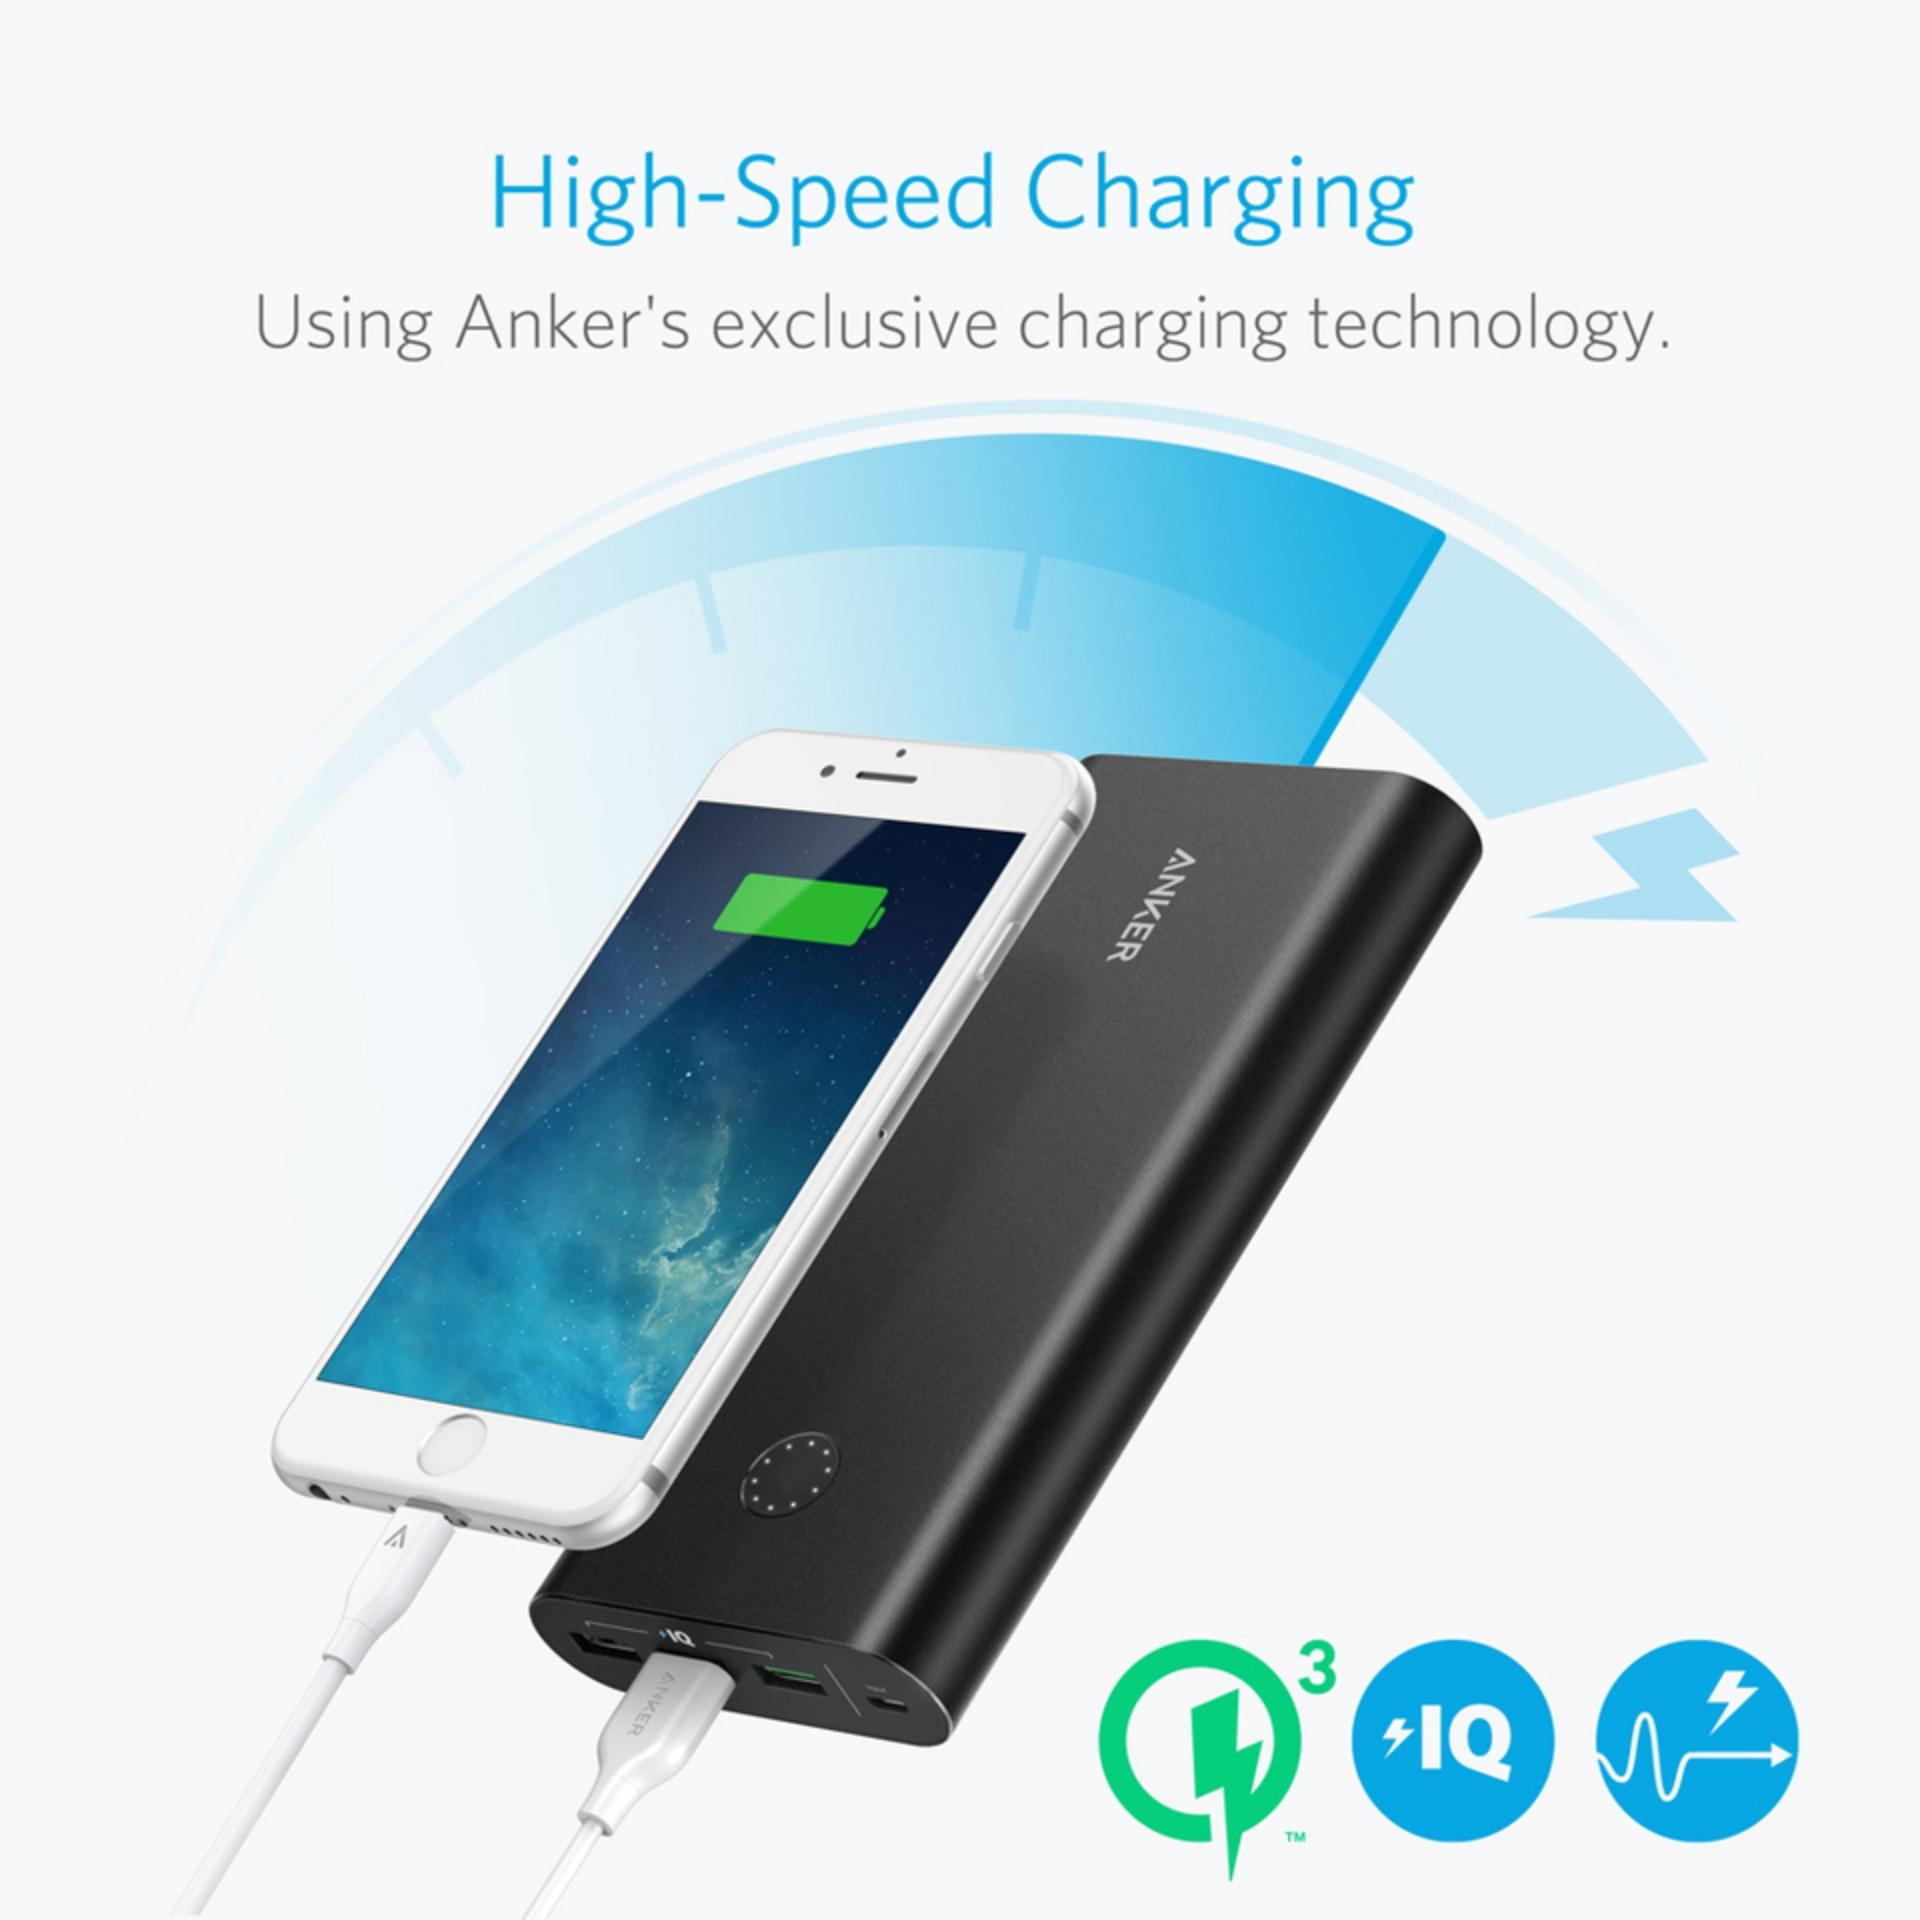 Anker PowerCore+ 26800mAh & Quick Charge 3.0 Charger (SG Plug)